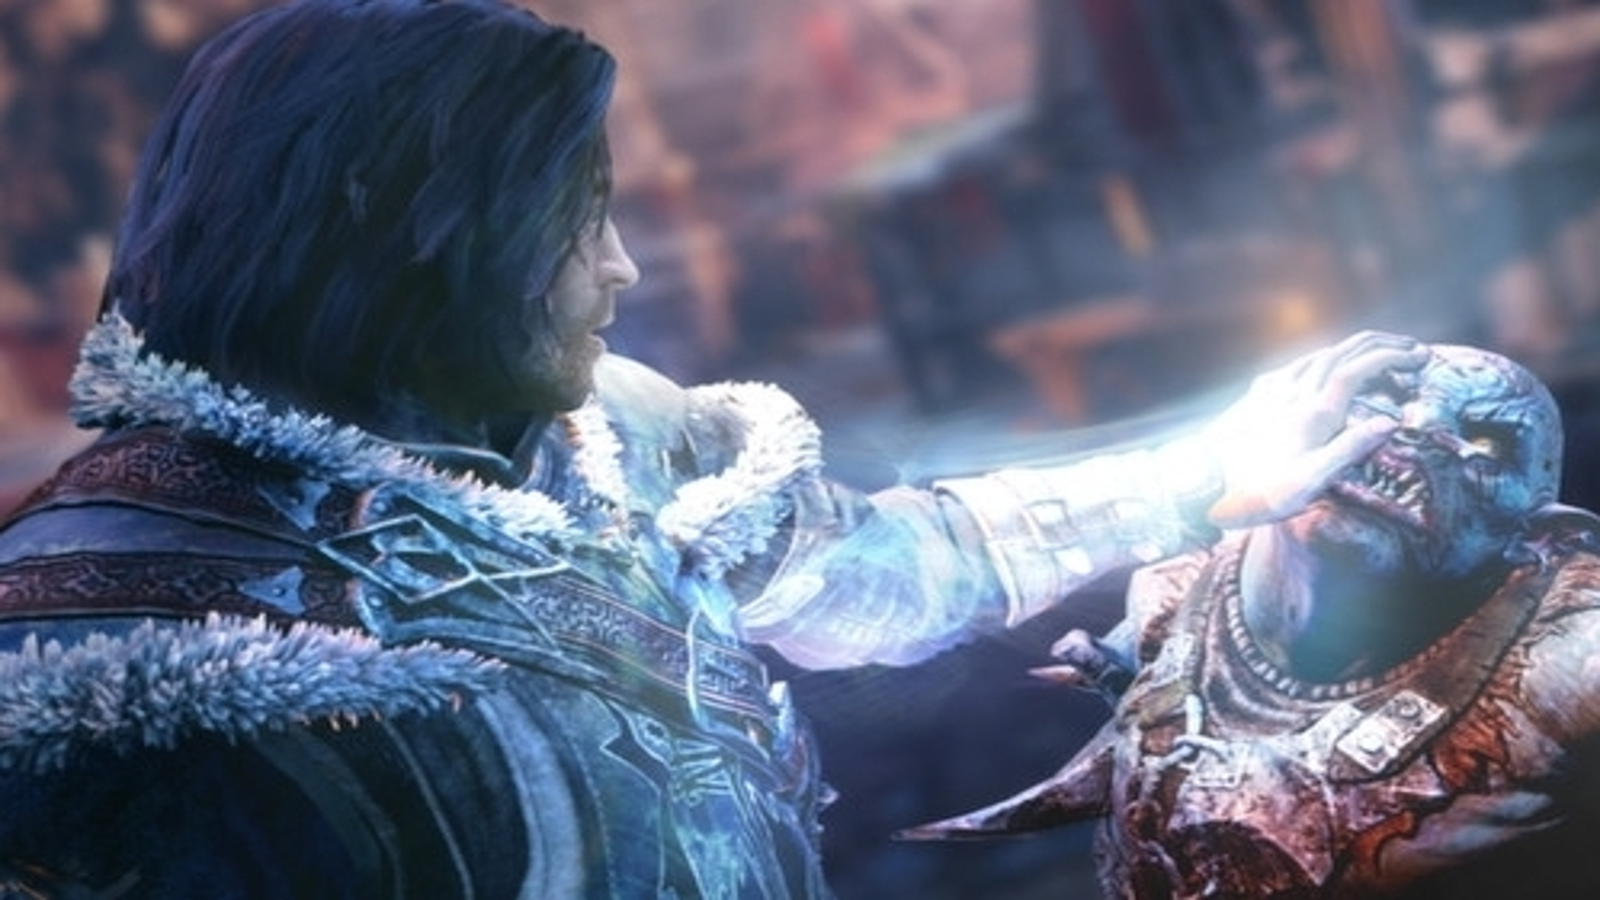 Middle-earth: Shadow of Mordor PC specs revealed